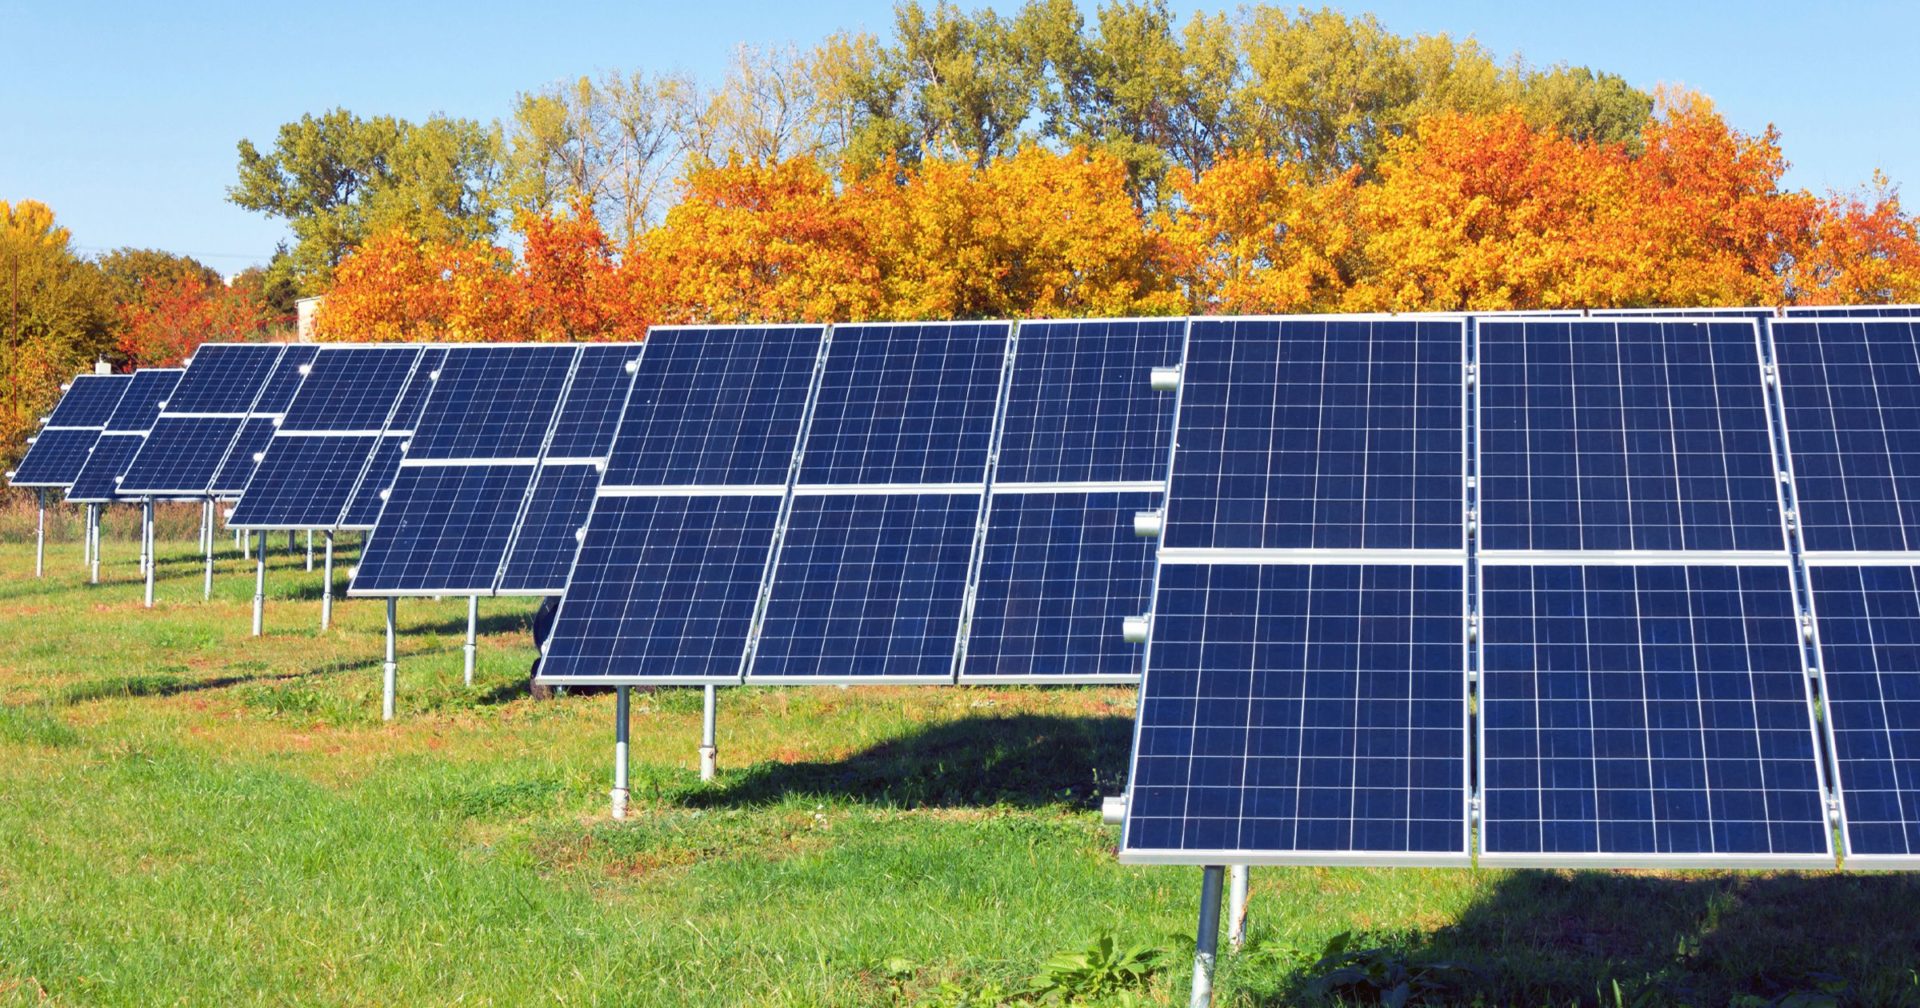 Reasons To Go Solar In Fall